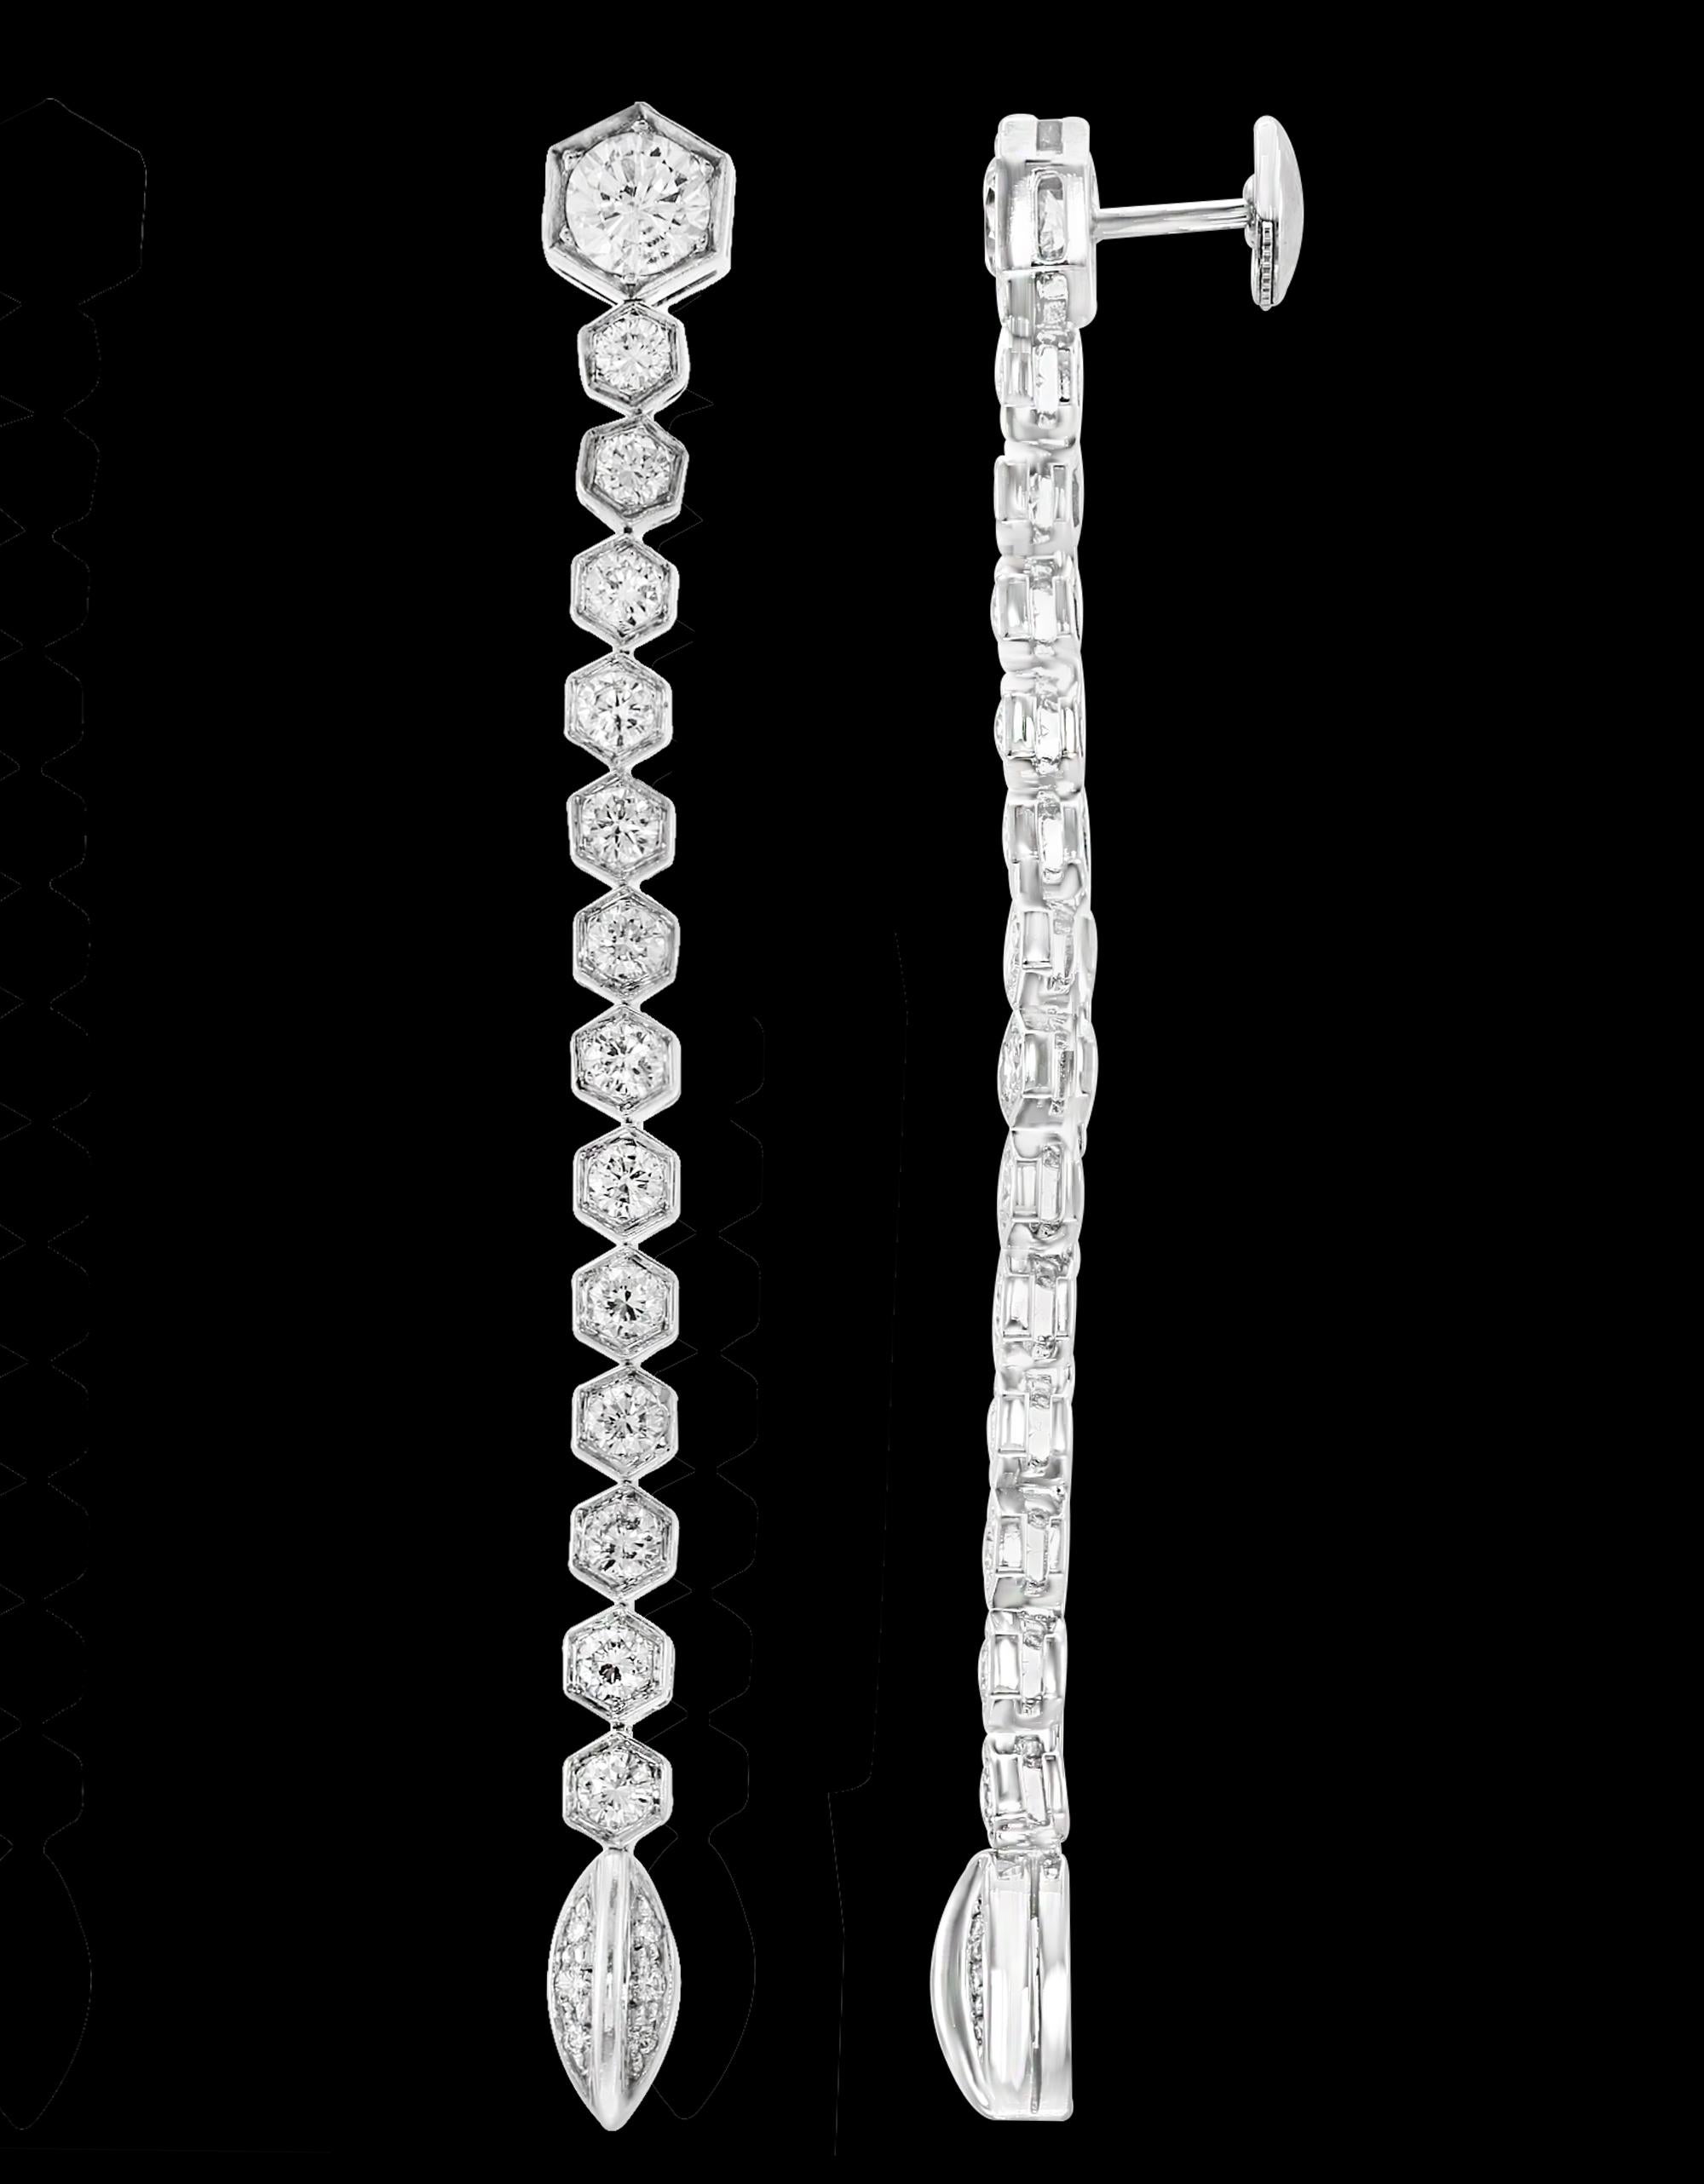 12 Carat Diamond Line Necklace and Line Earring Suite in 18 Karat White Gold 2